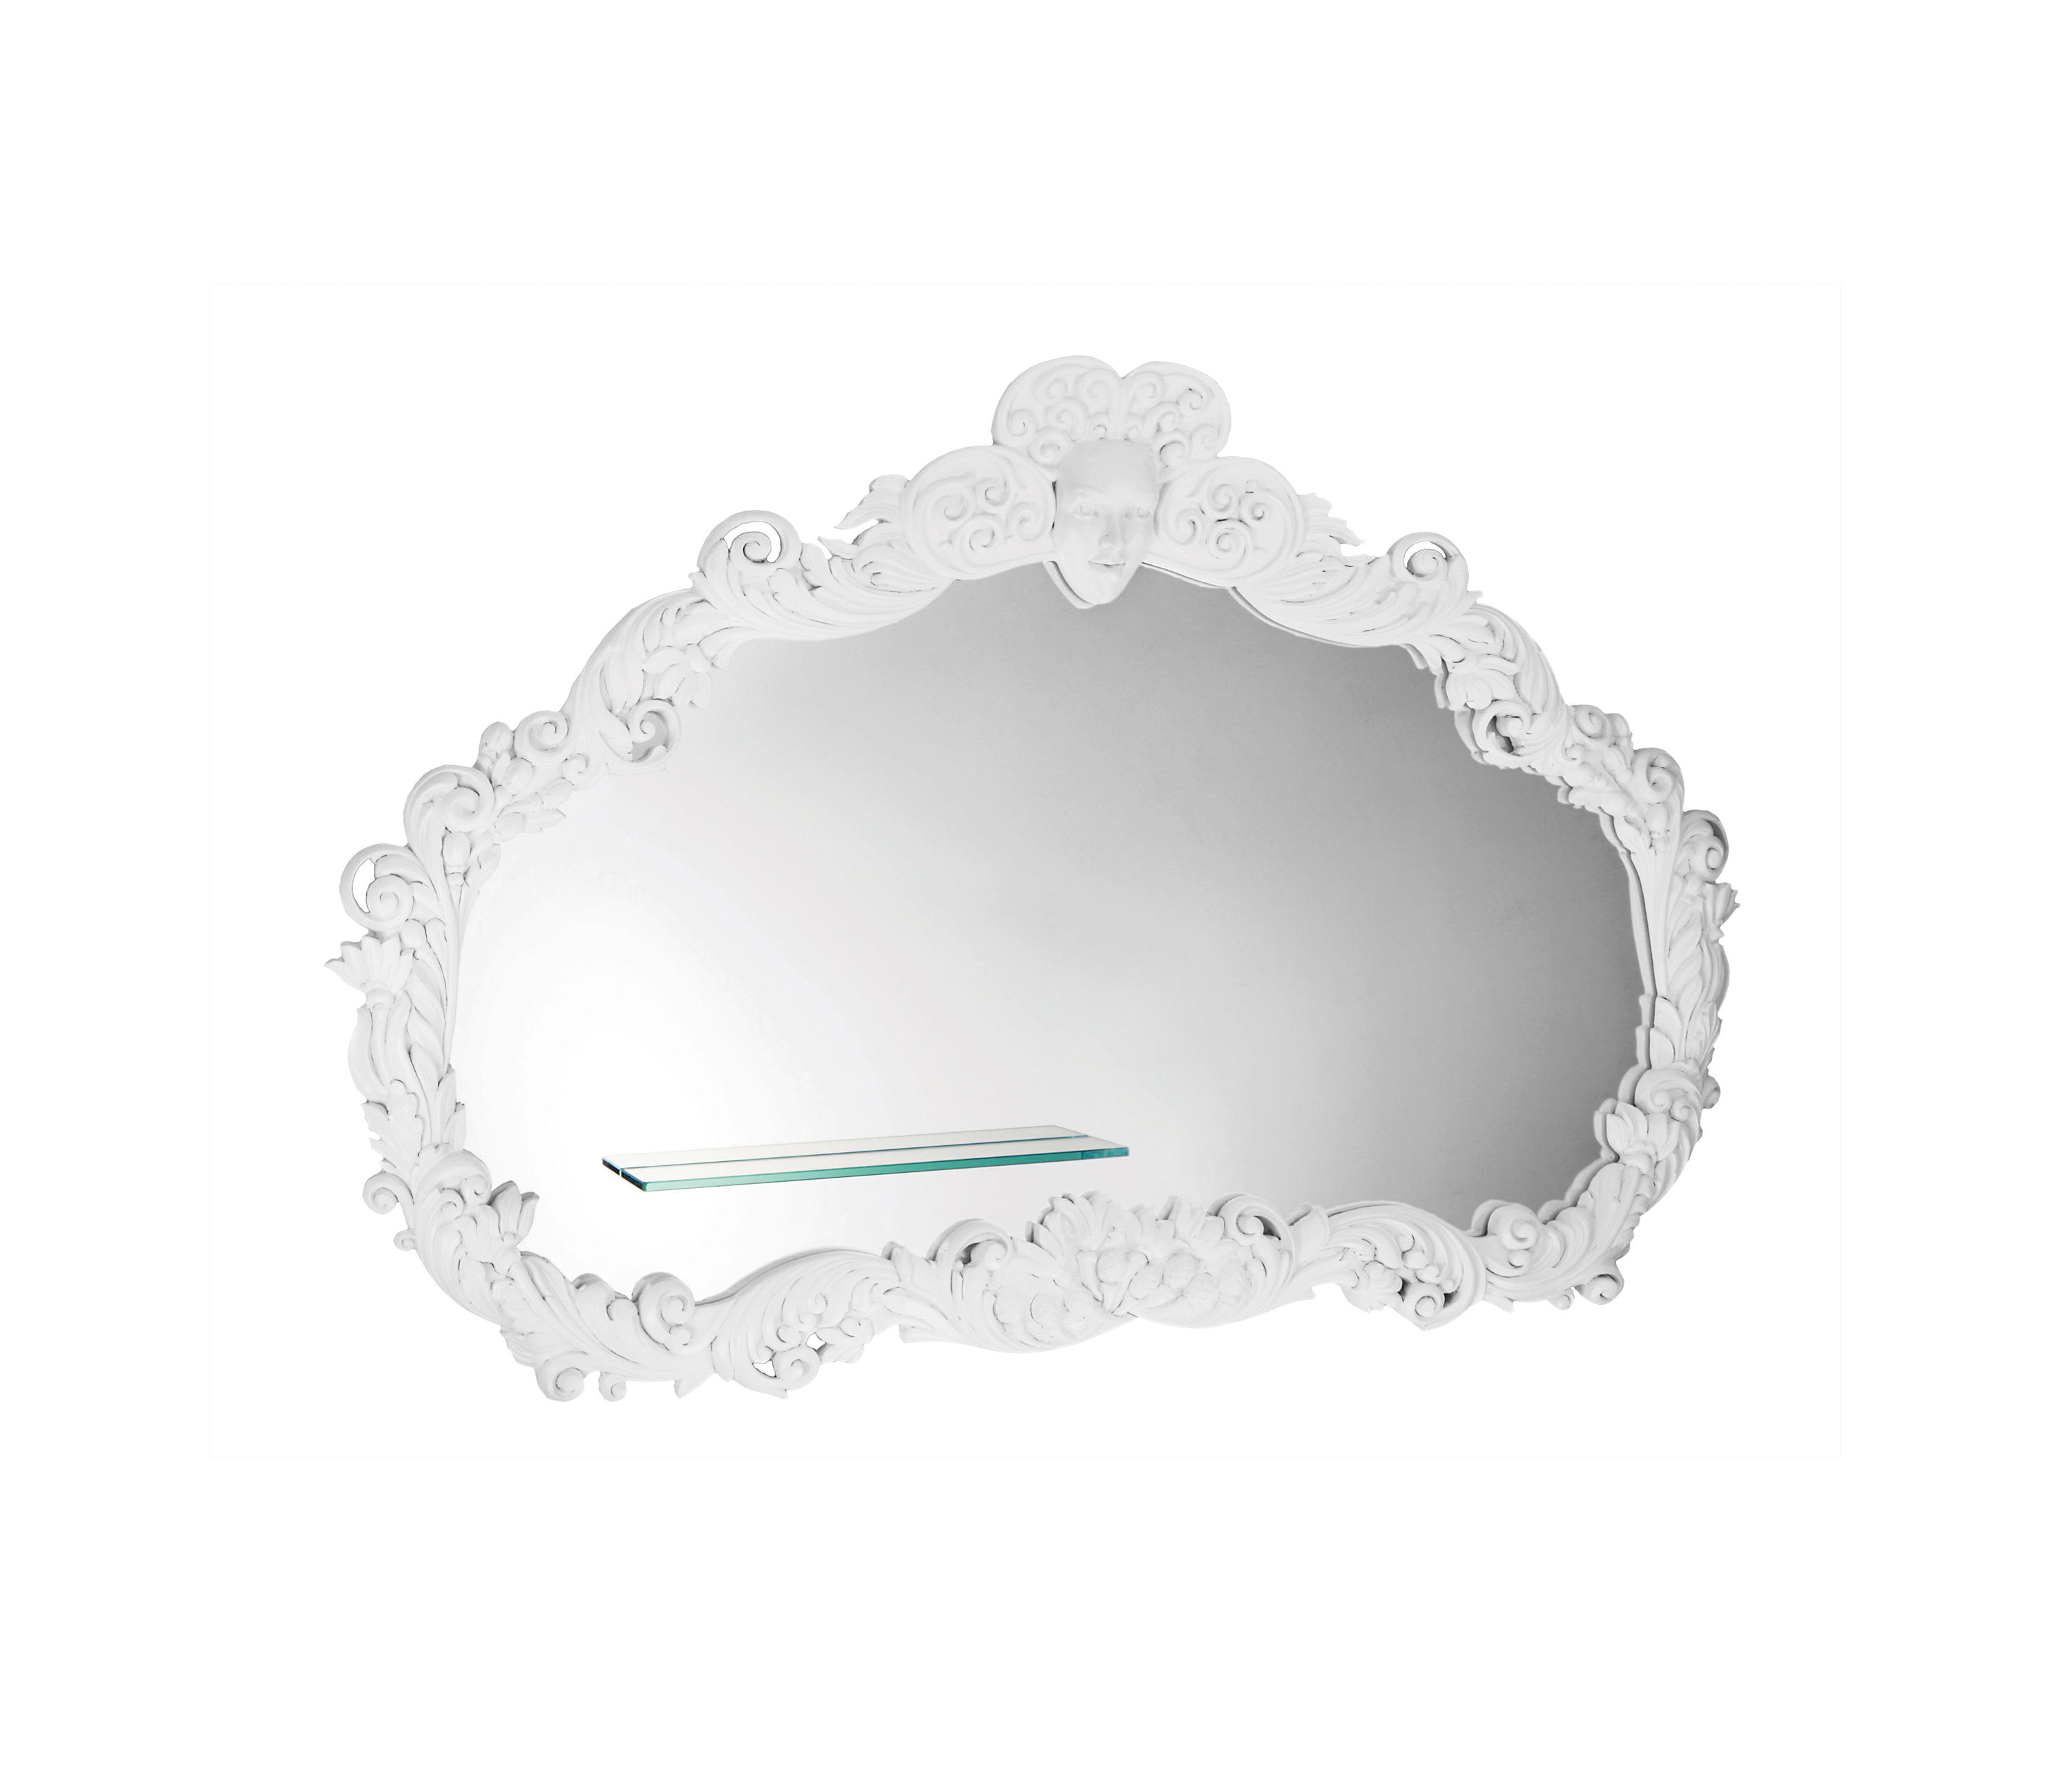 Paris Mirror Mirrors From Quodes Architonic